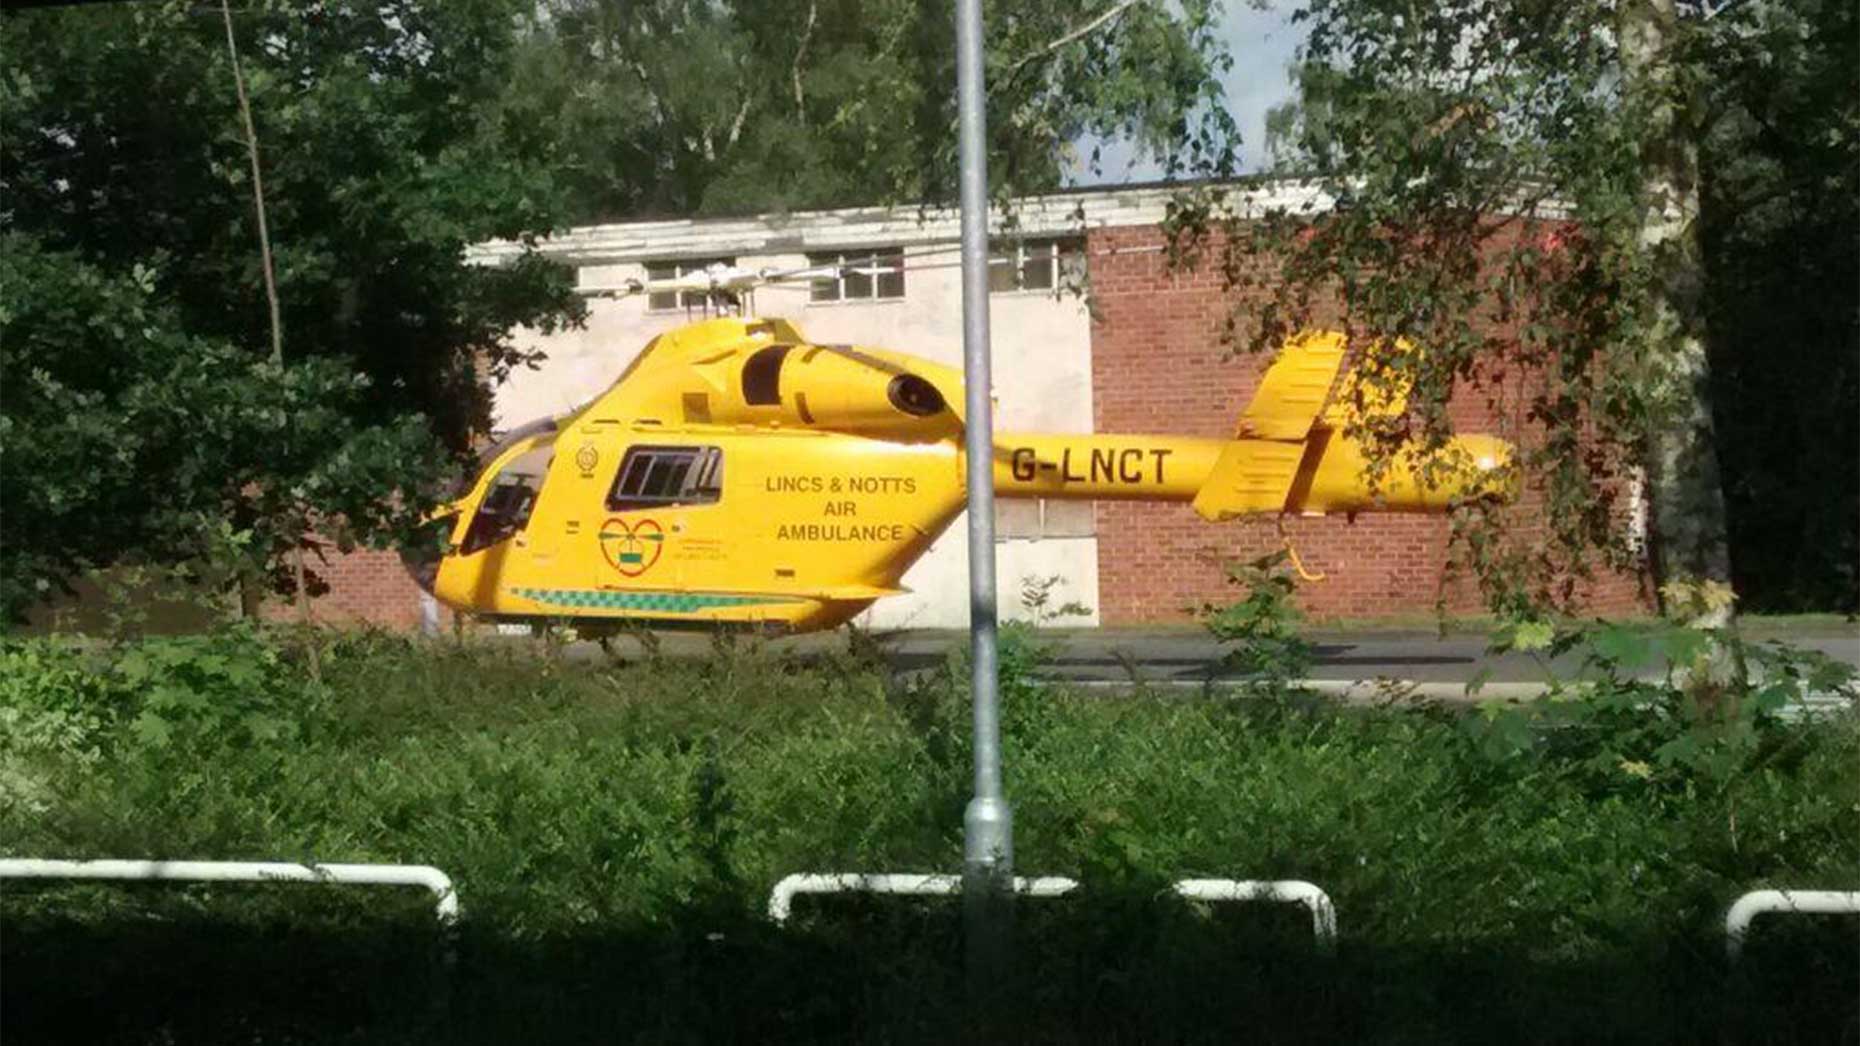 The air ambulance awaiting the biker to be transported to hospital. Photo: Sian Wright